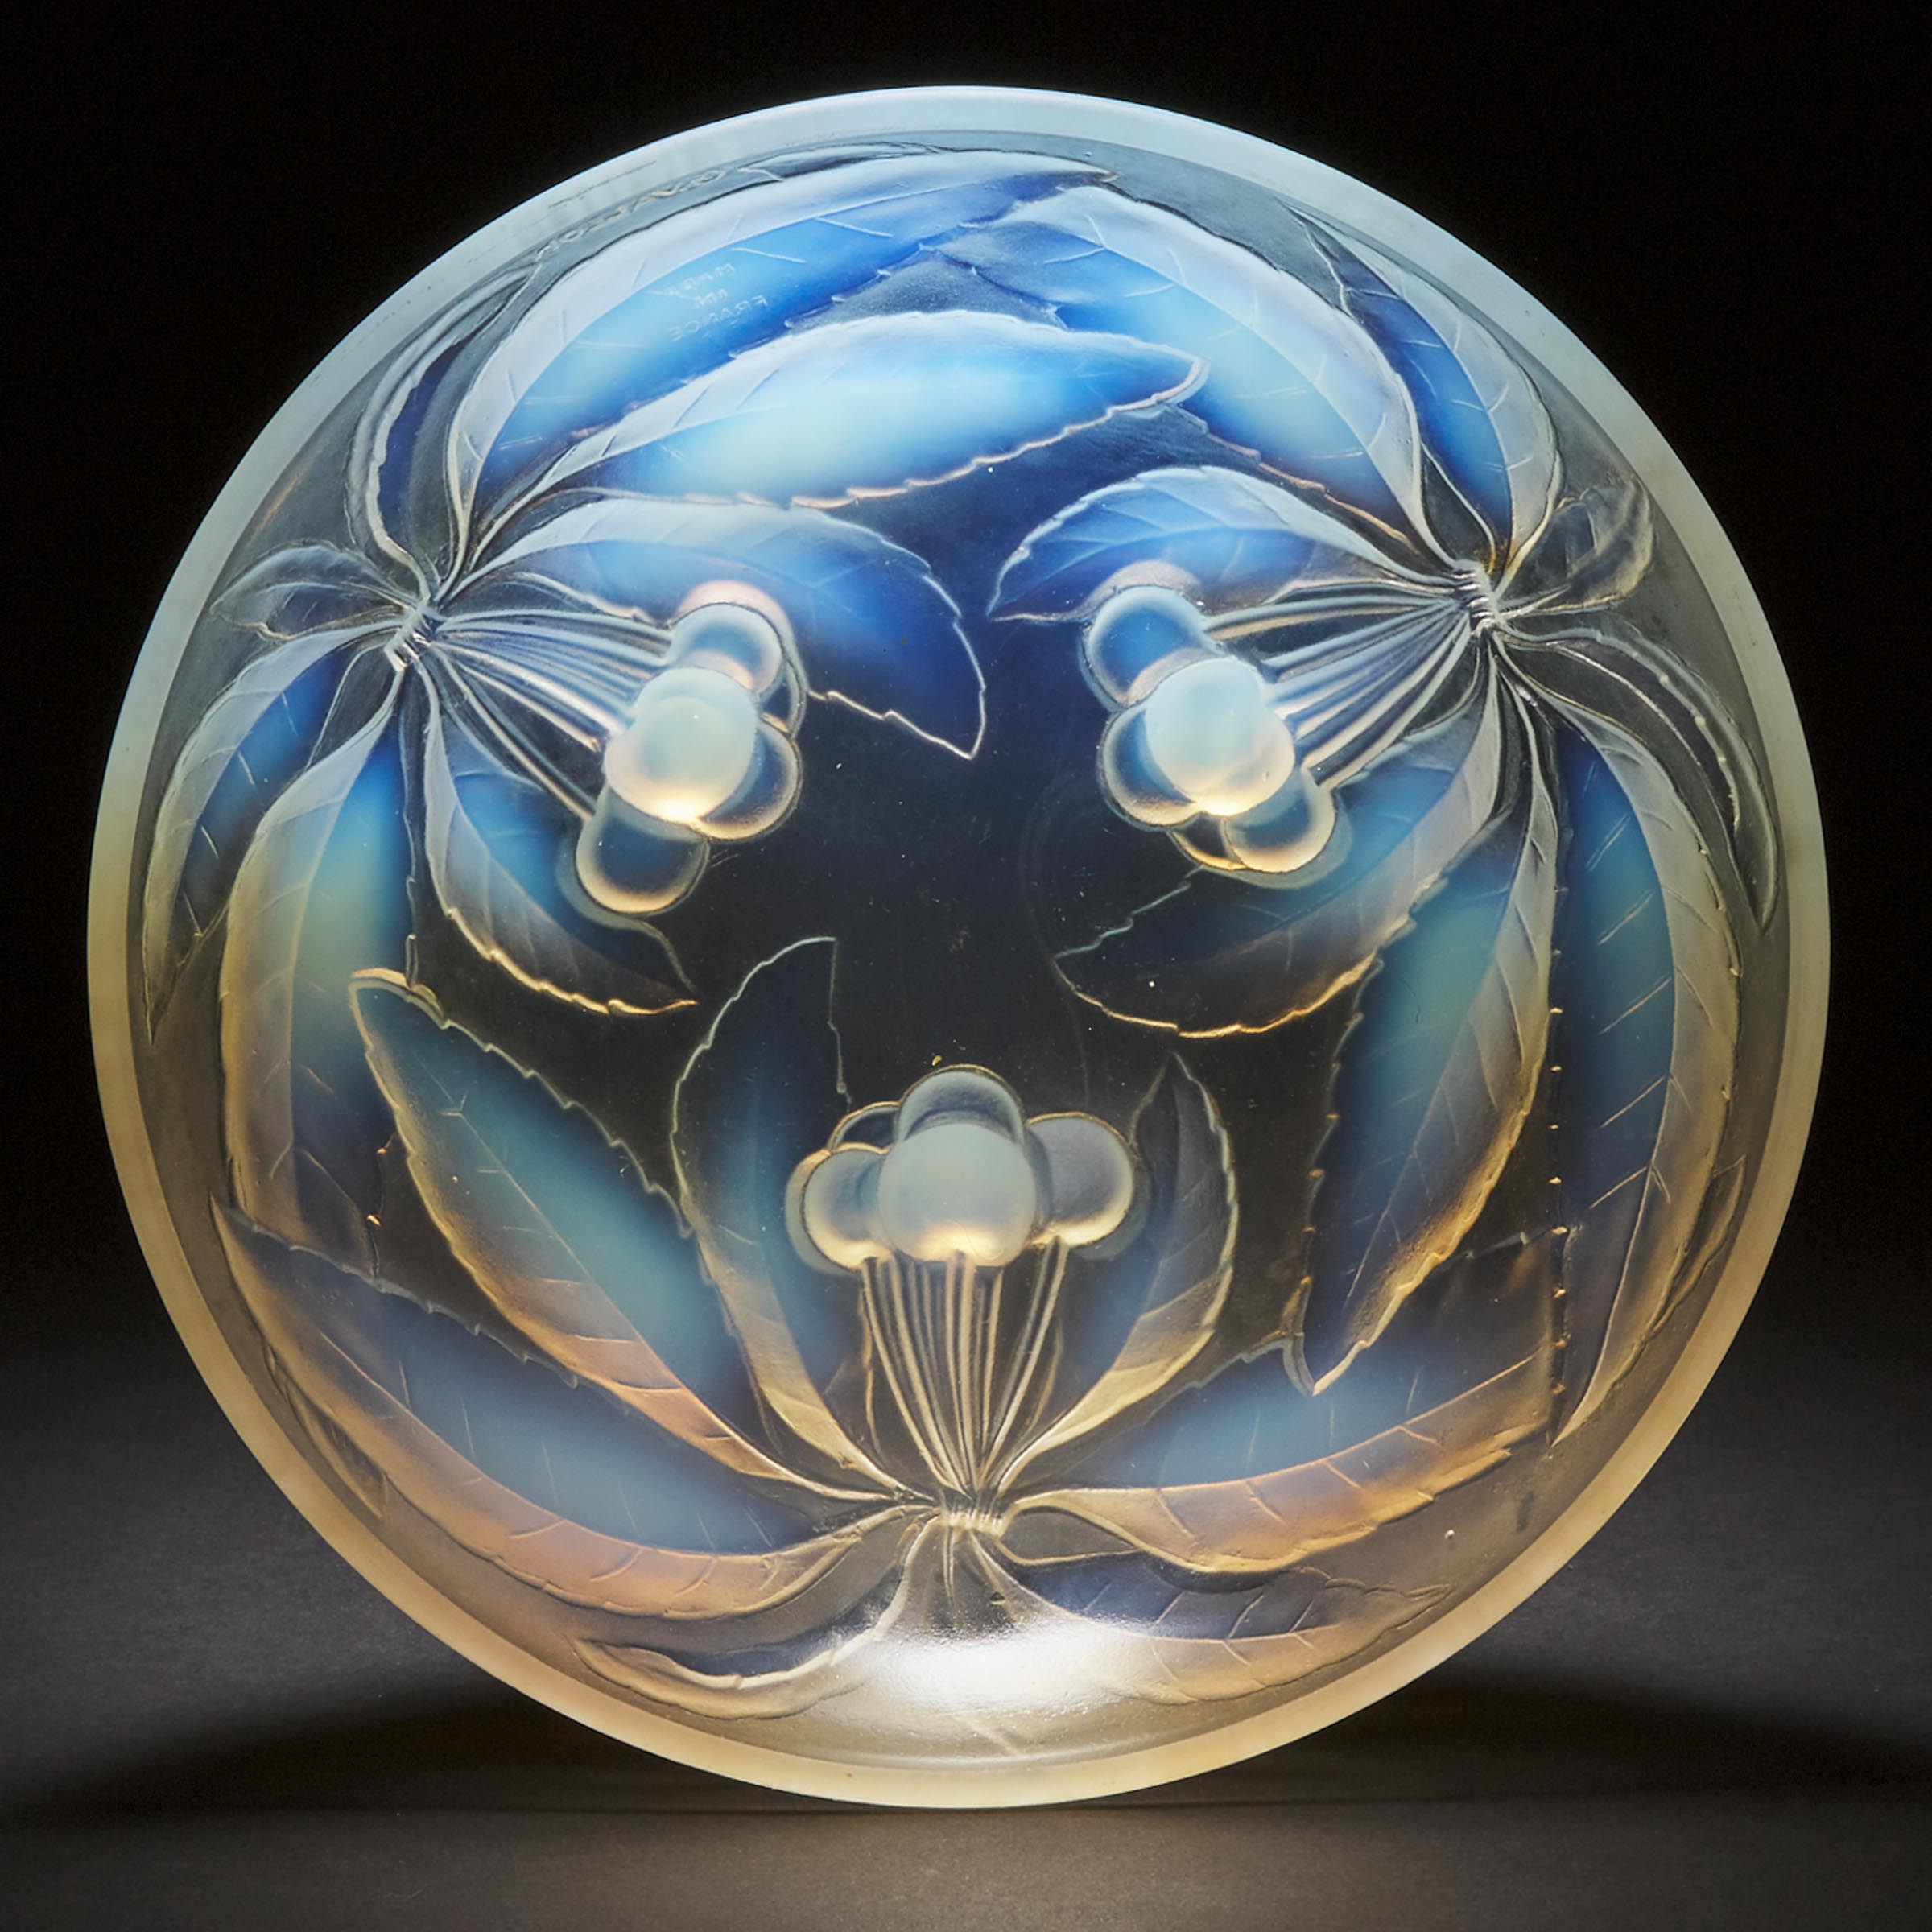 G. Vallon Moulded and Frosted Opalescent Glass Bowl, mid-20th century